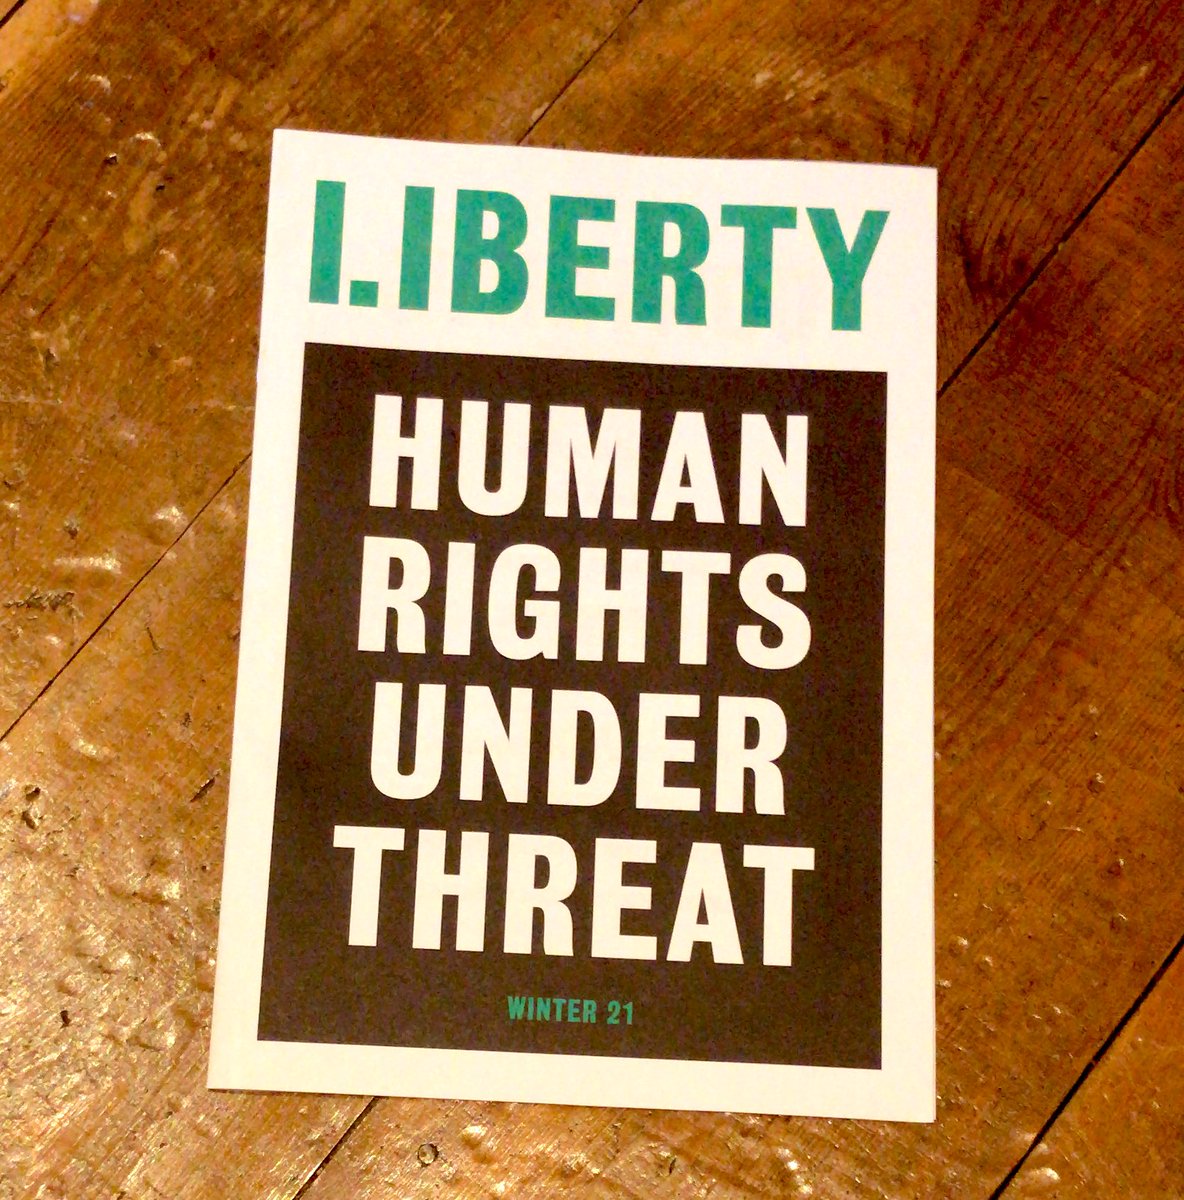 If you aren’t a member, strongly recommend you take a look at @libertyhq #FightForHumanRights
#KillTheBill
#RightToProtest